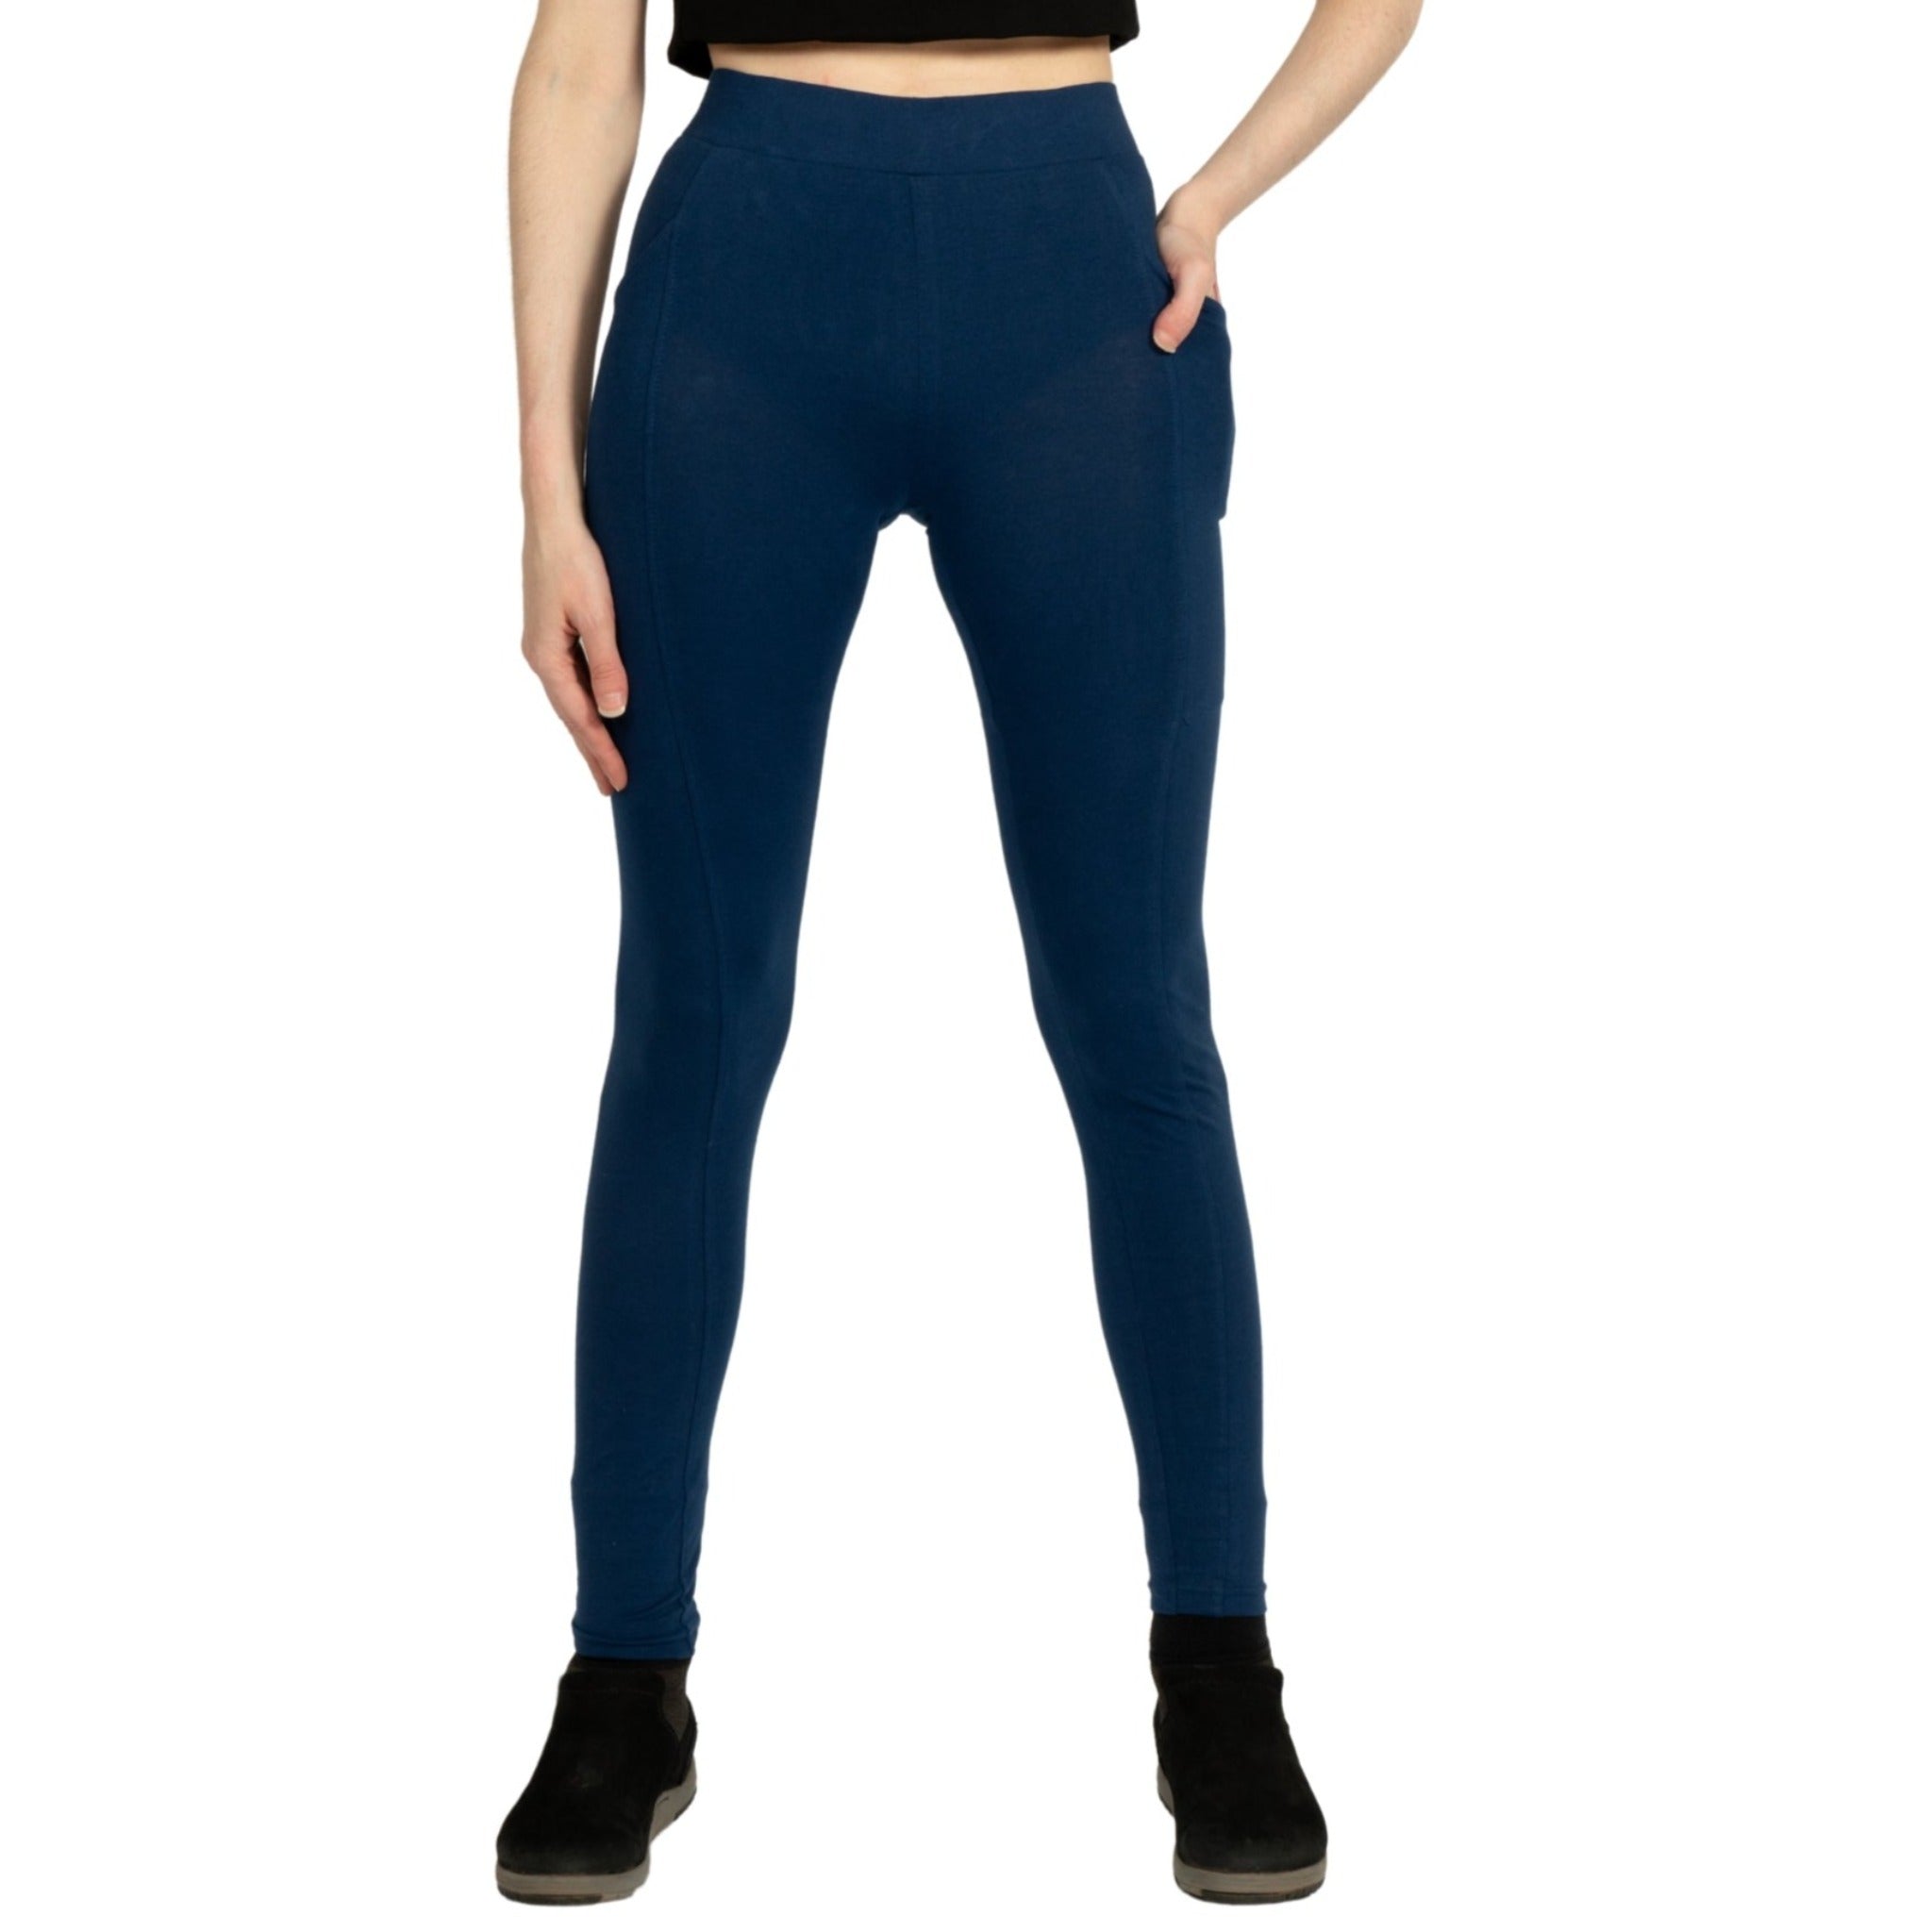 Navy Blue Adults Leggings with Pockets